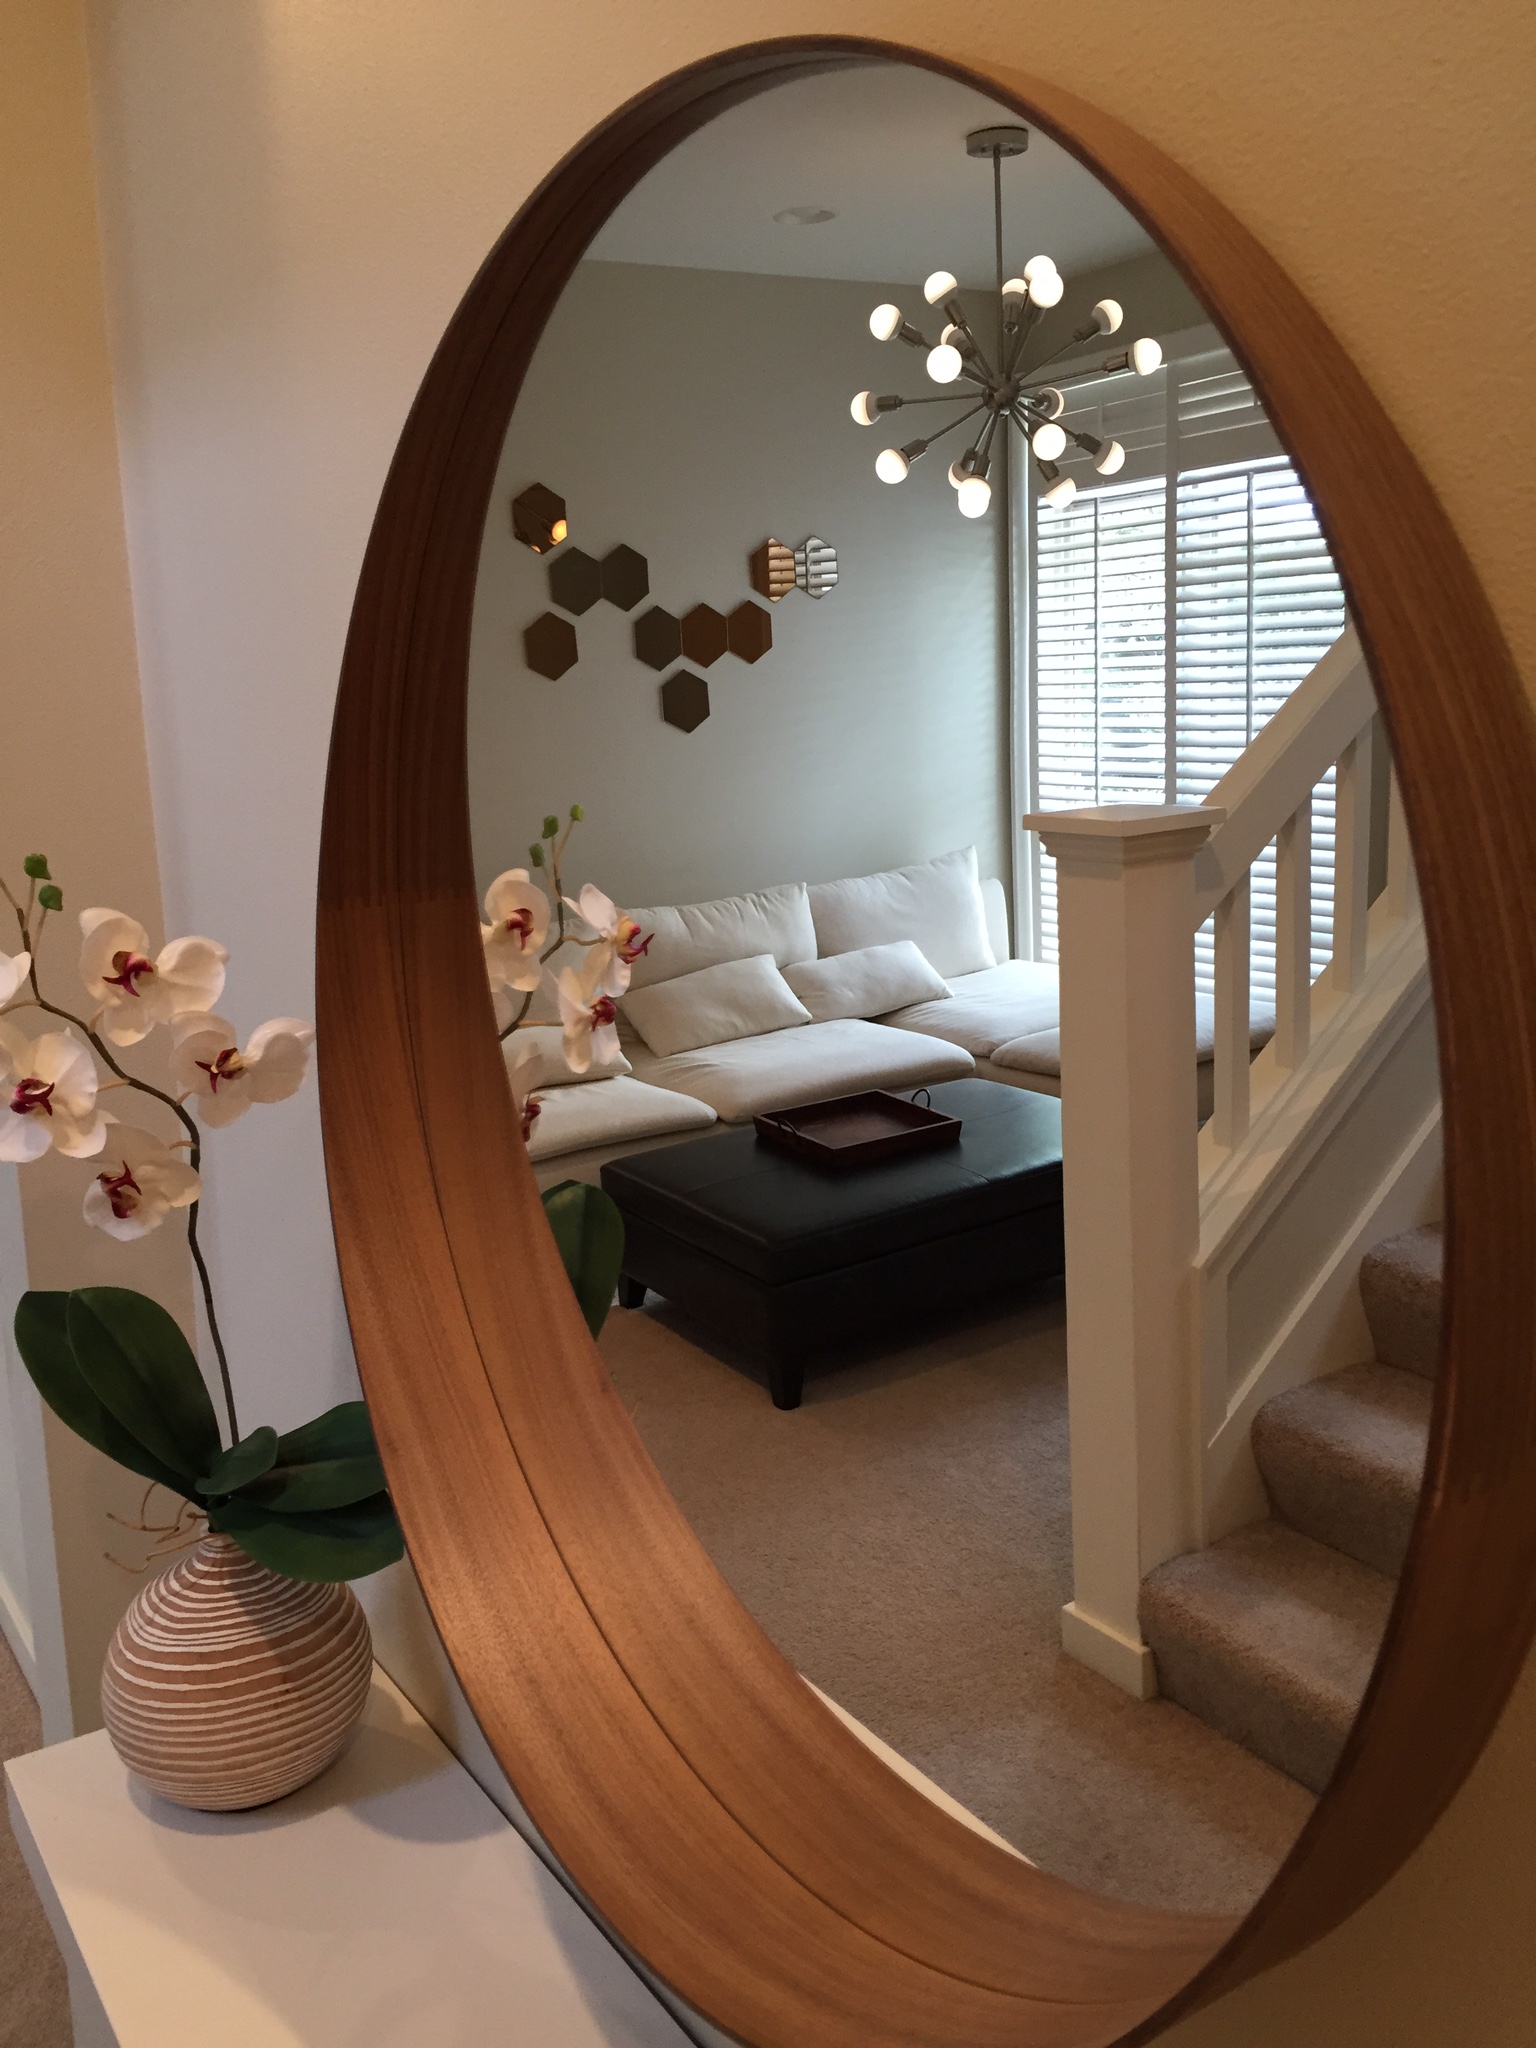 How To Hang An Ikea Mirror Stockholm, Round Mirror Ikea Wood